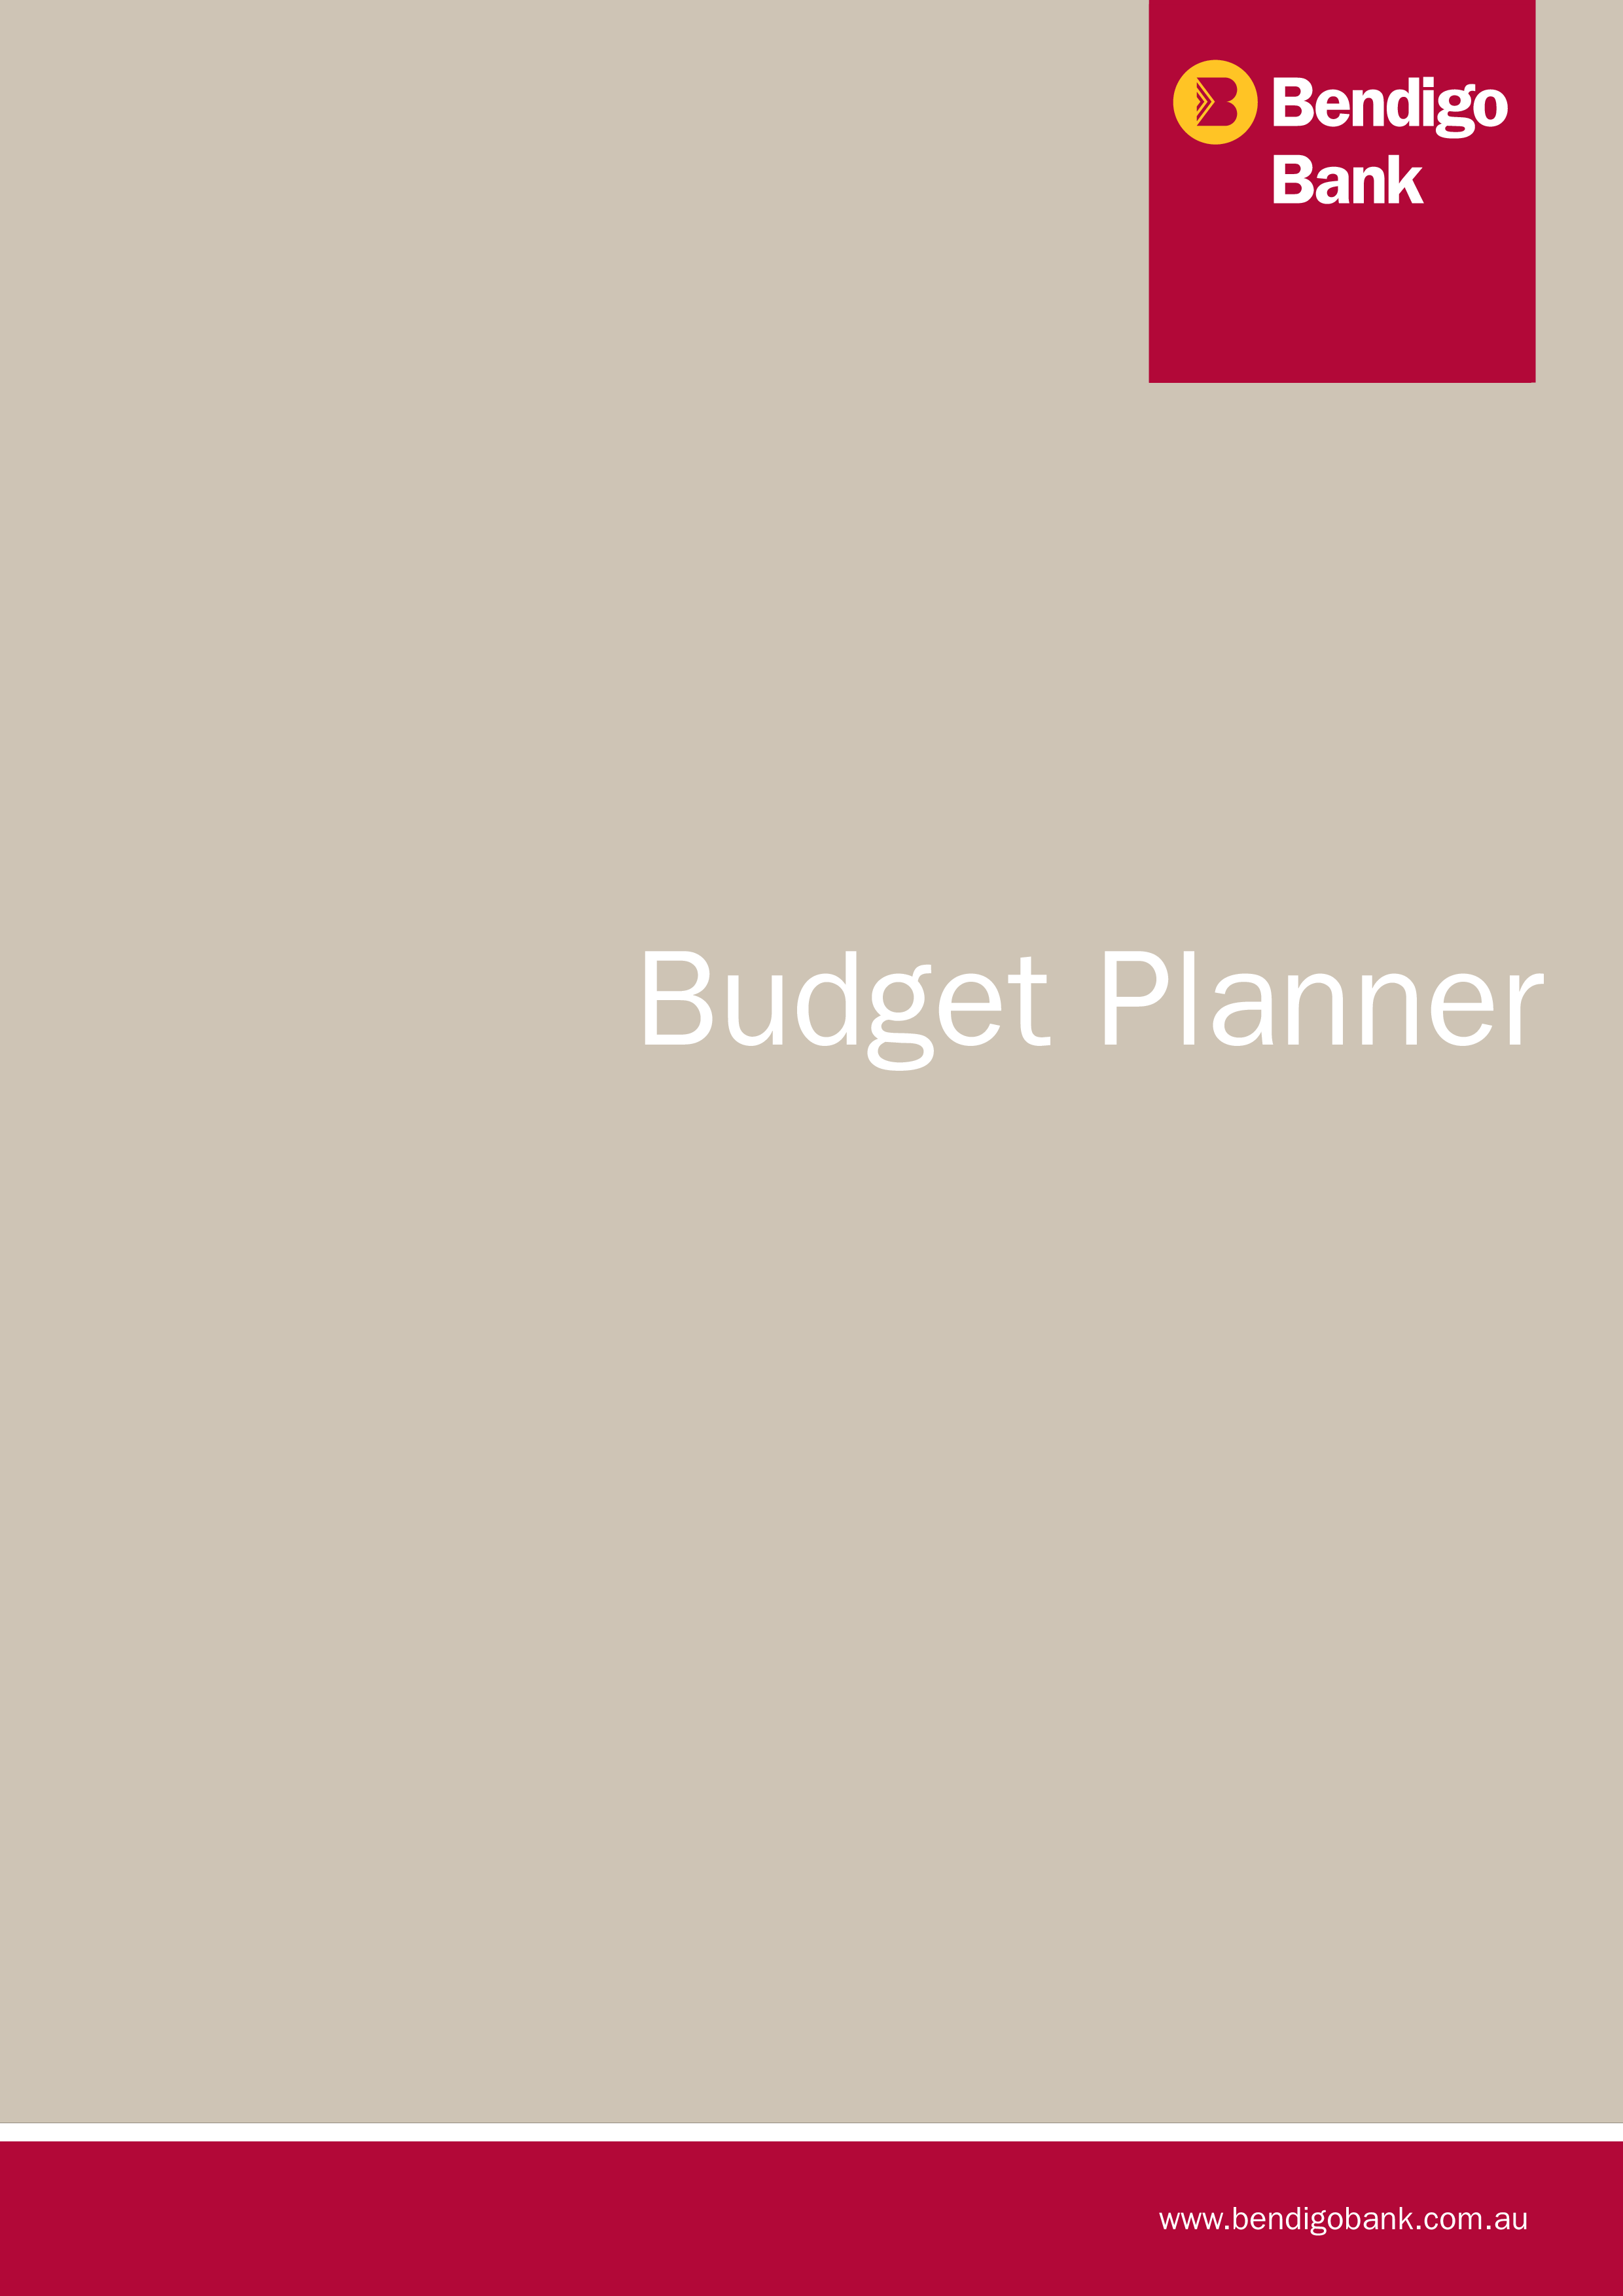 Monthly Budget Planner main image